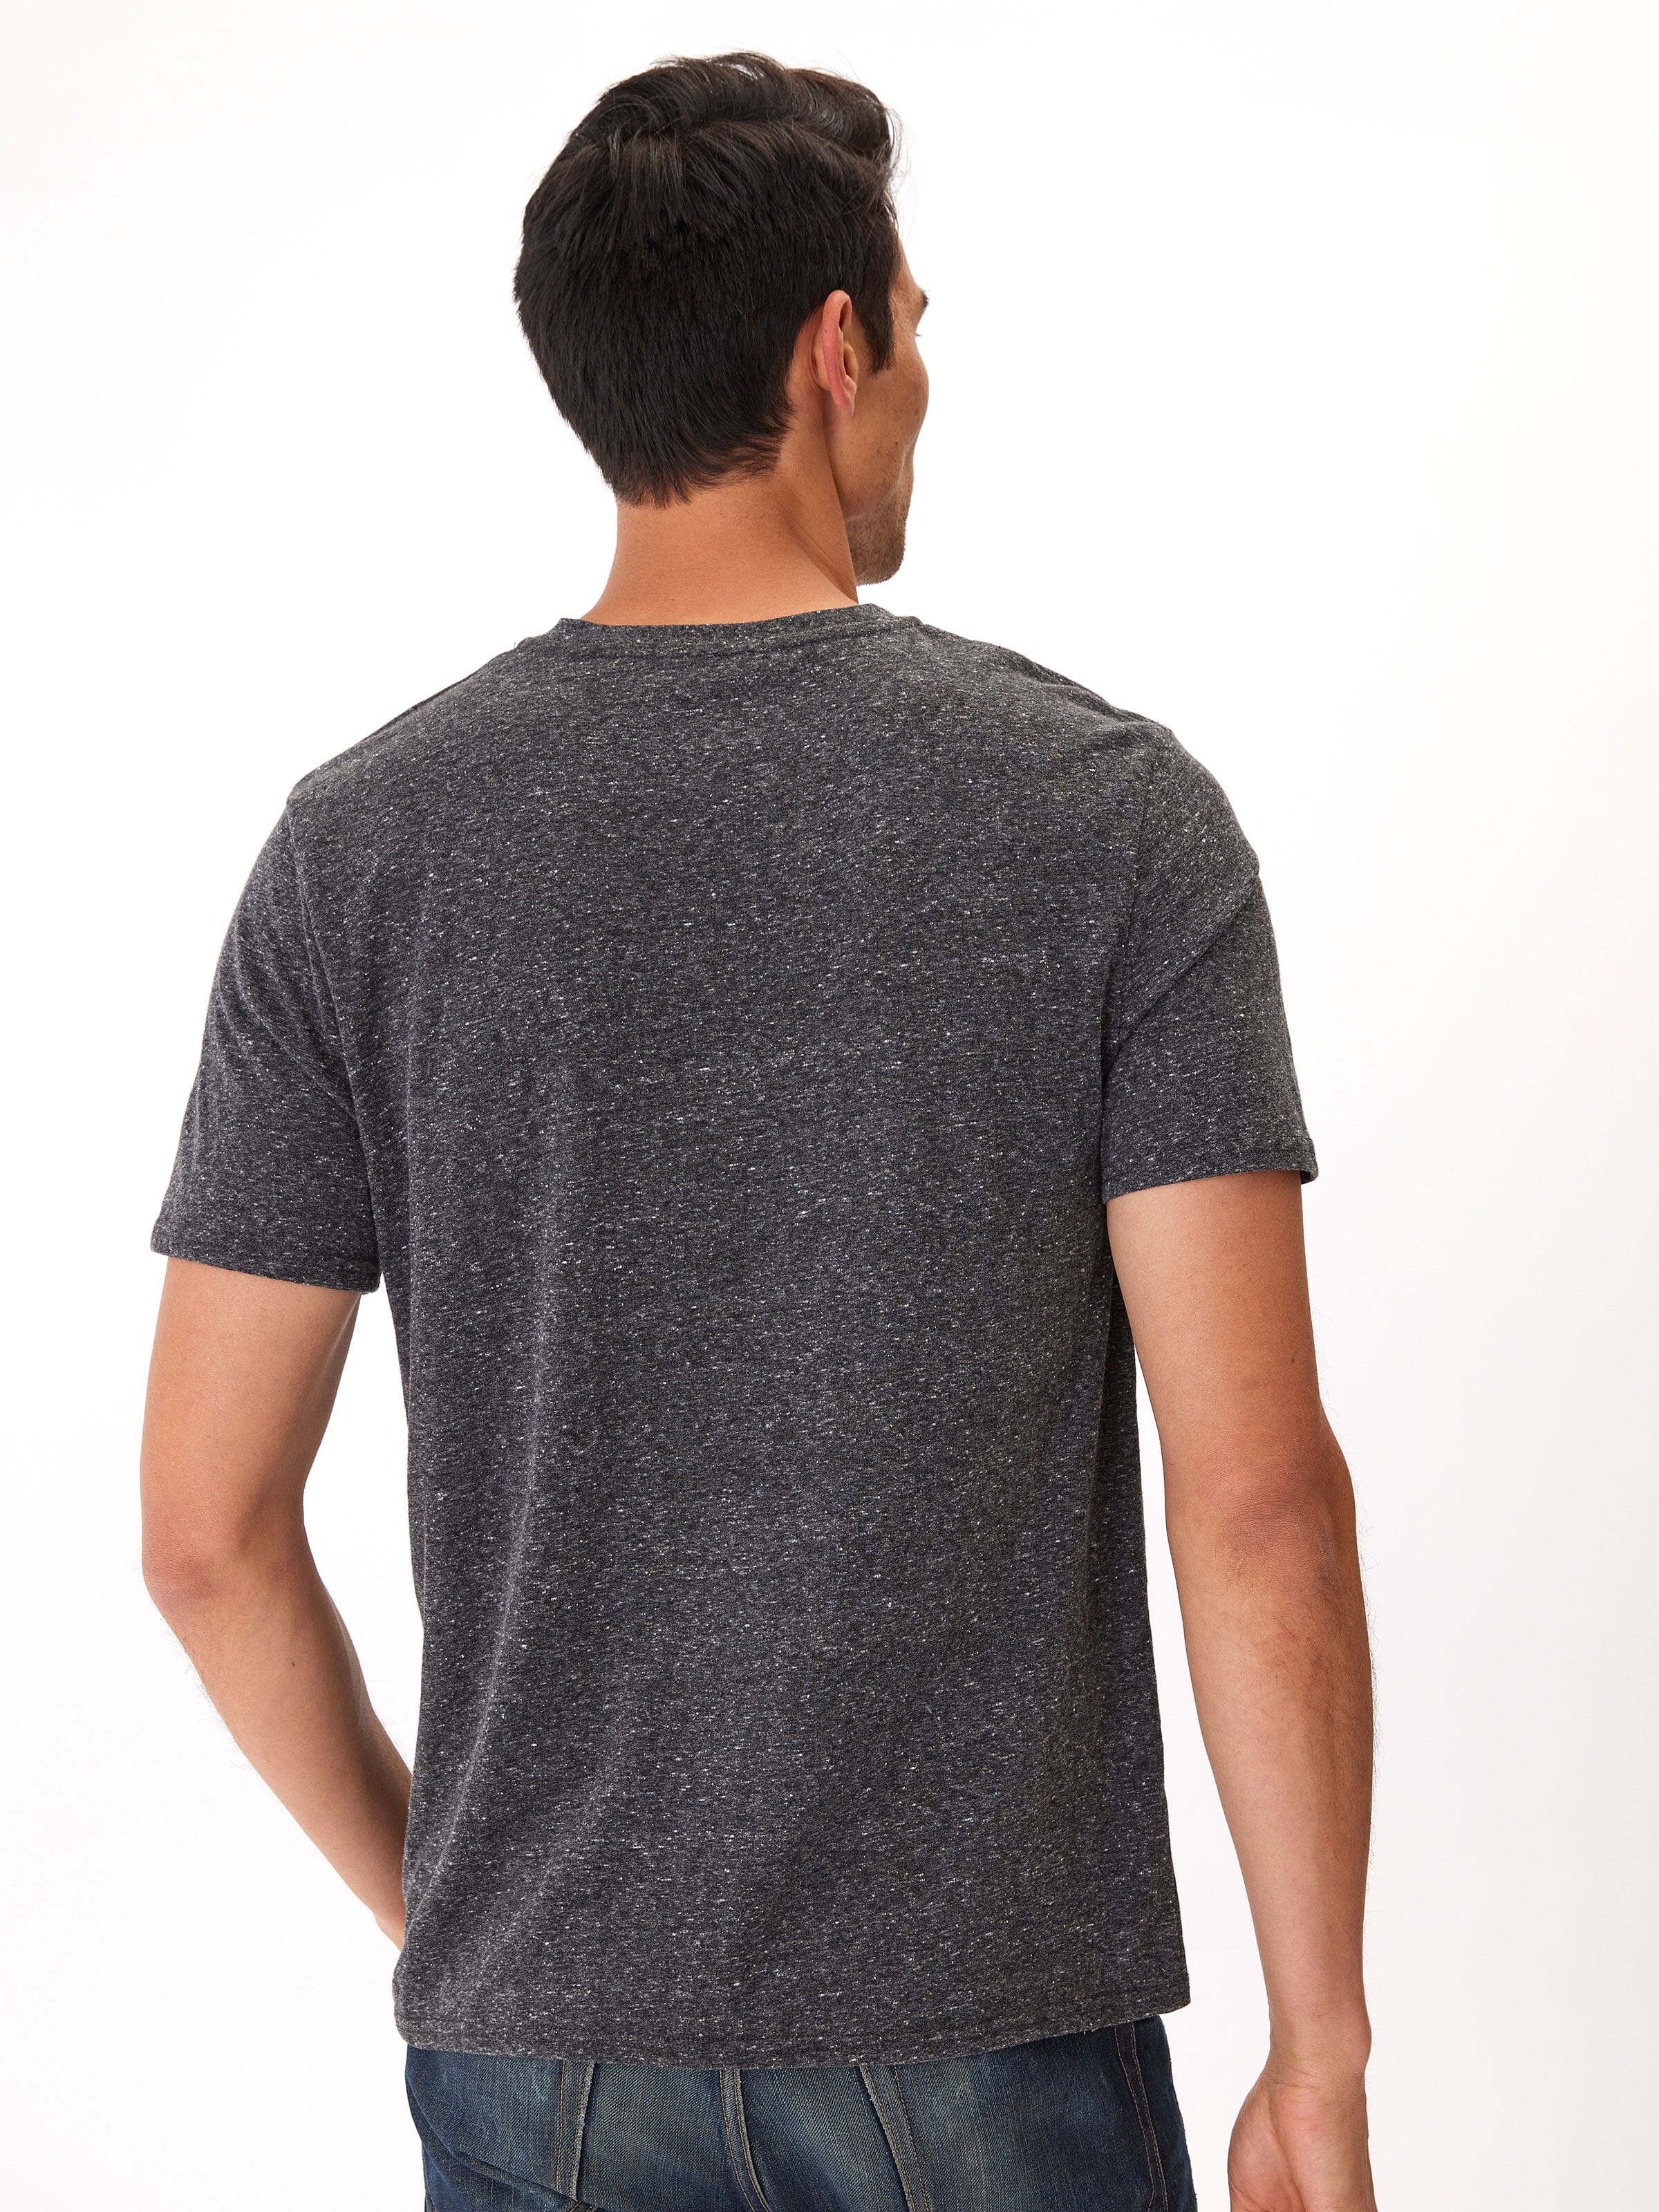 – Triblend Crew Grey Tee Threads Neck in Thought Heather 4